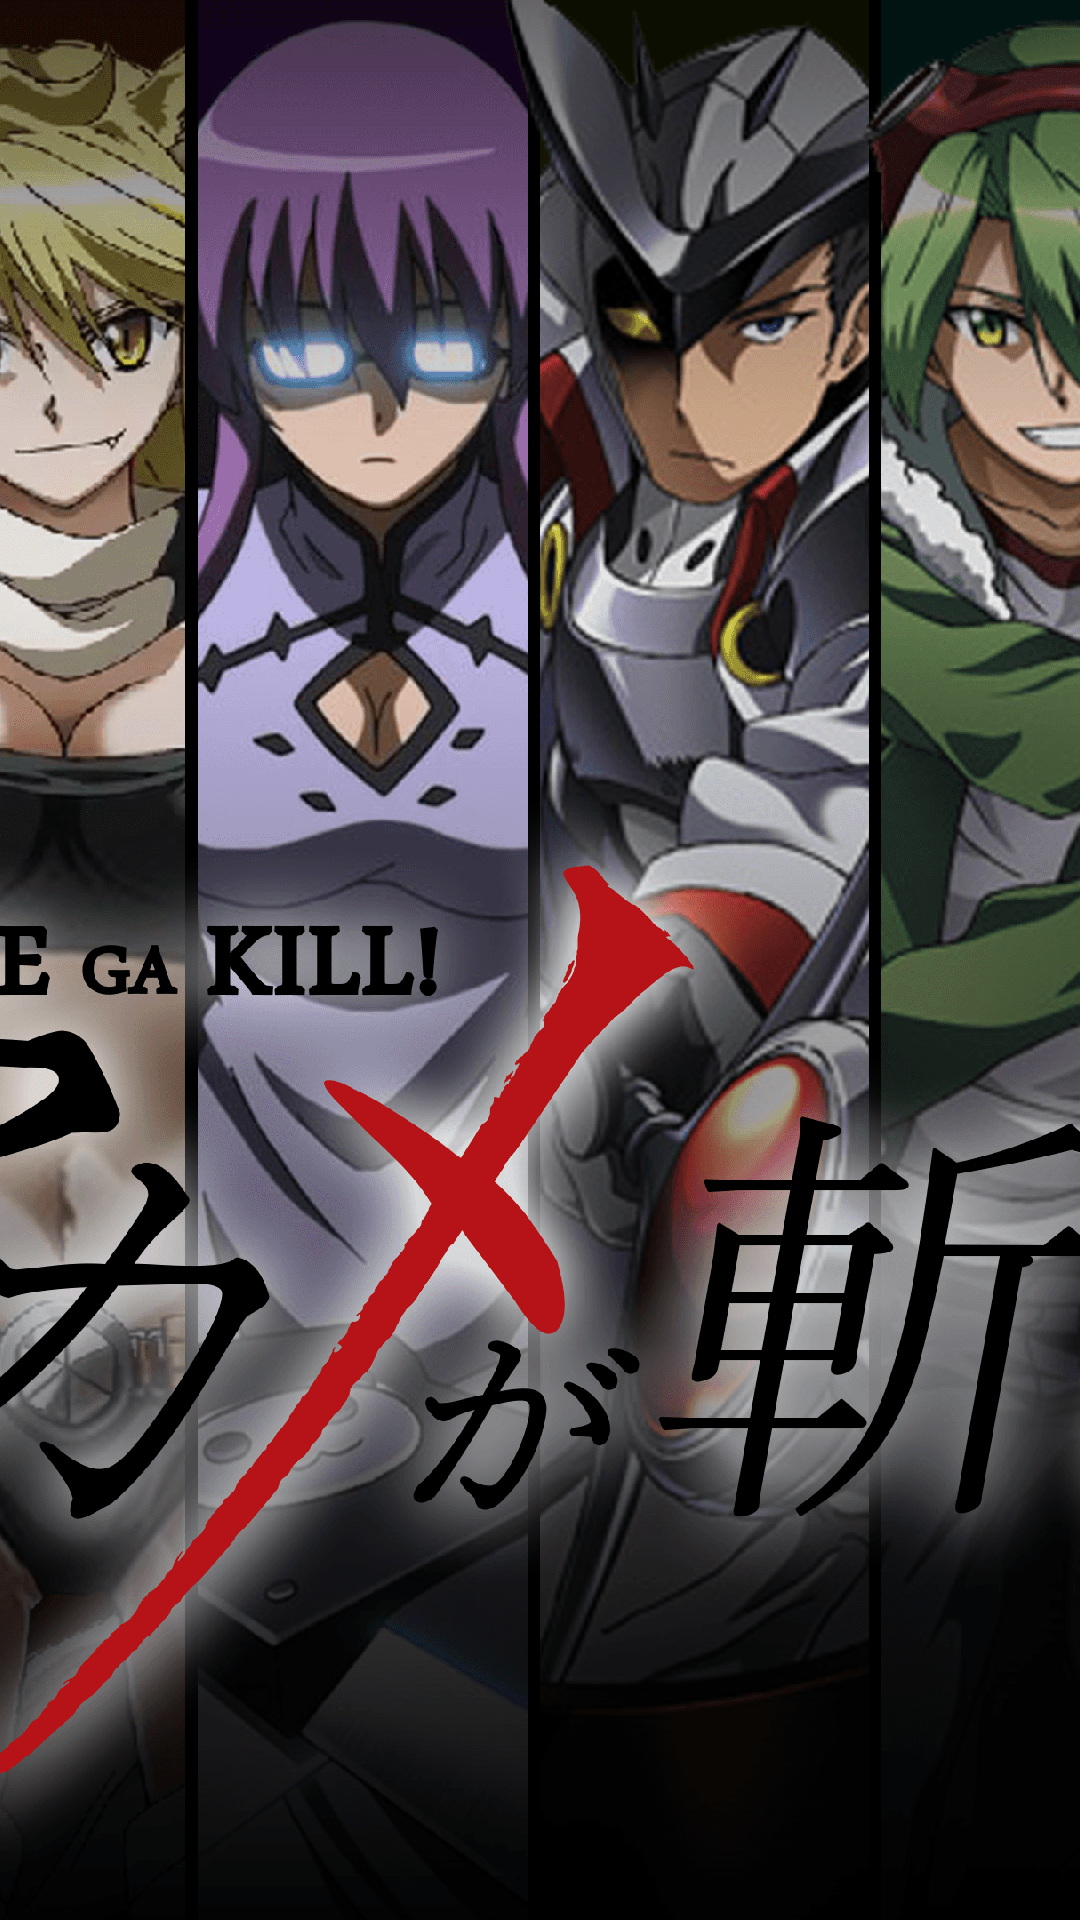 41+ Akame Ga Kill! Wallpapers for iPhone and Android by James Thomas MD